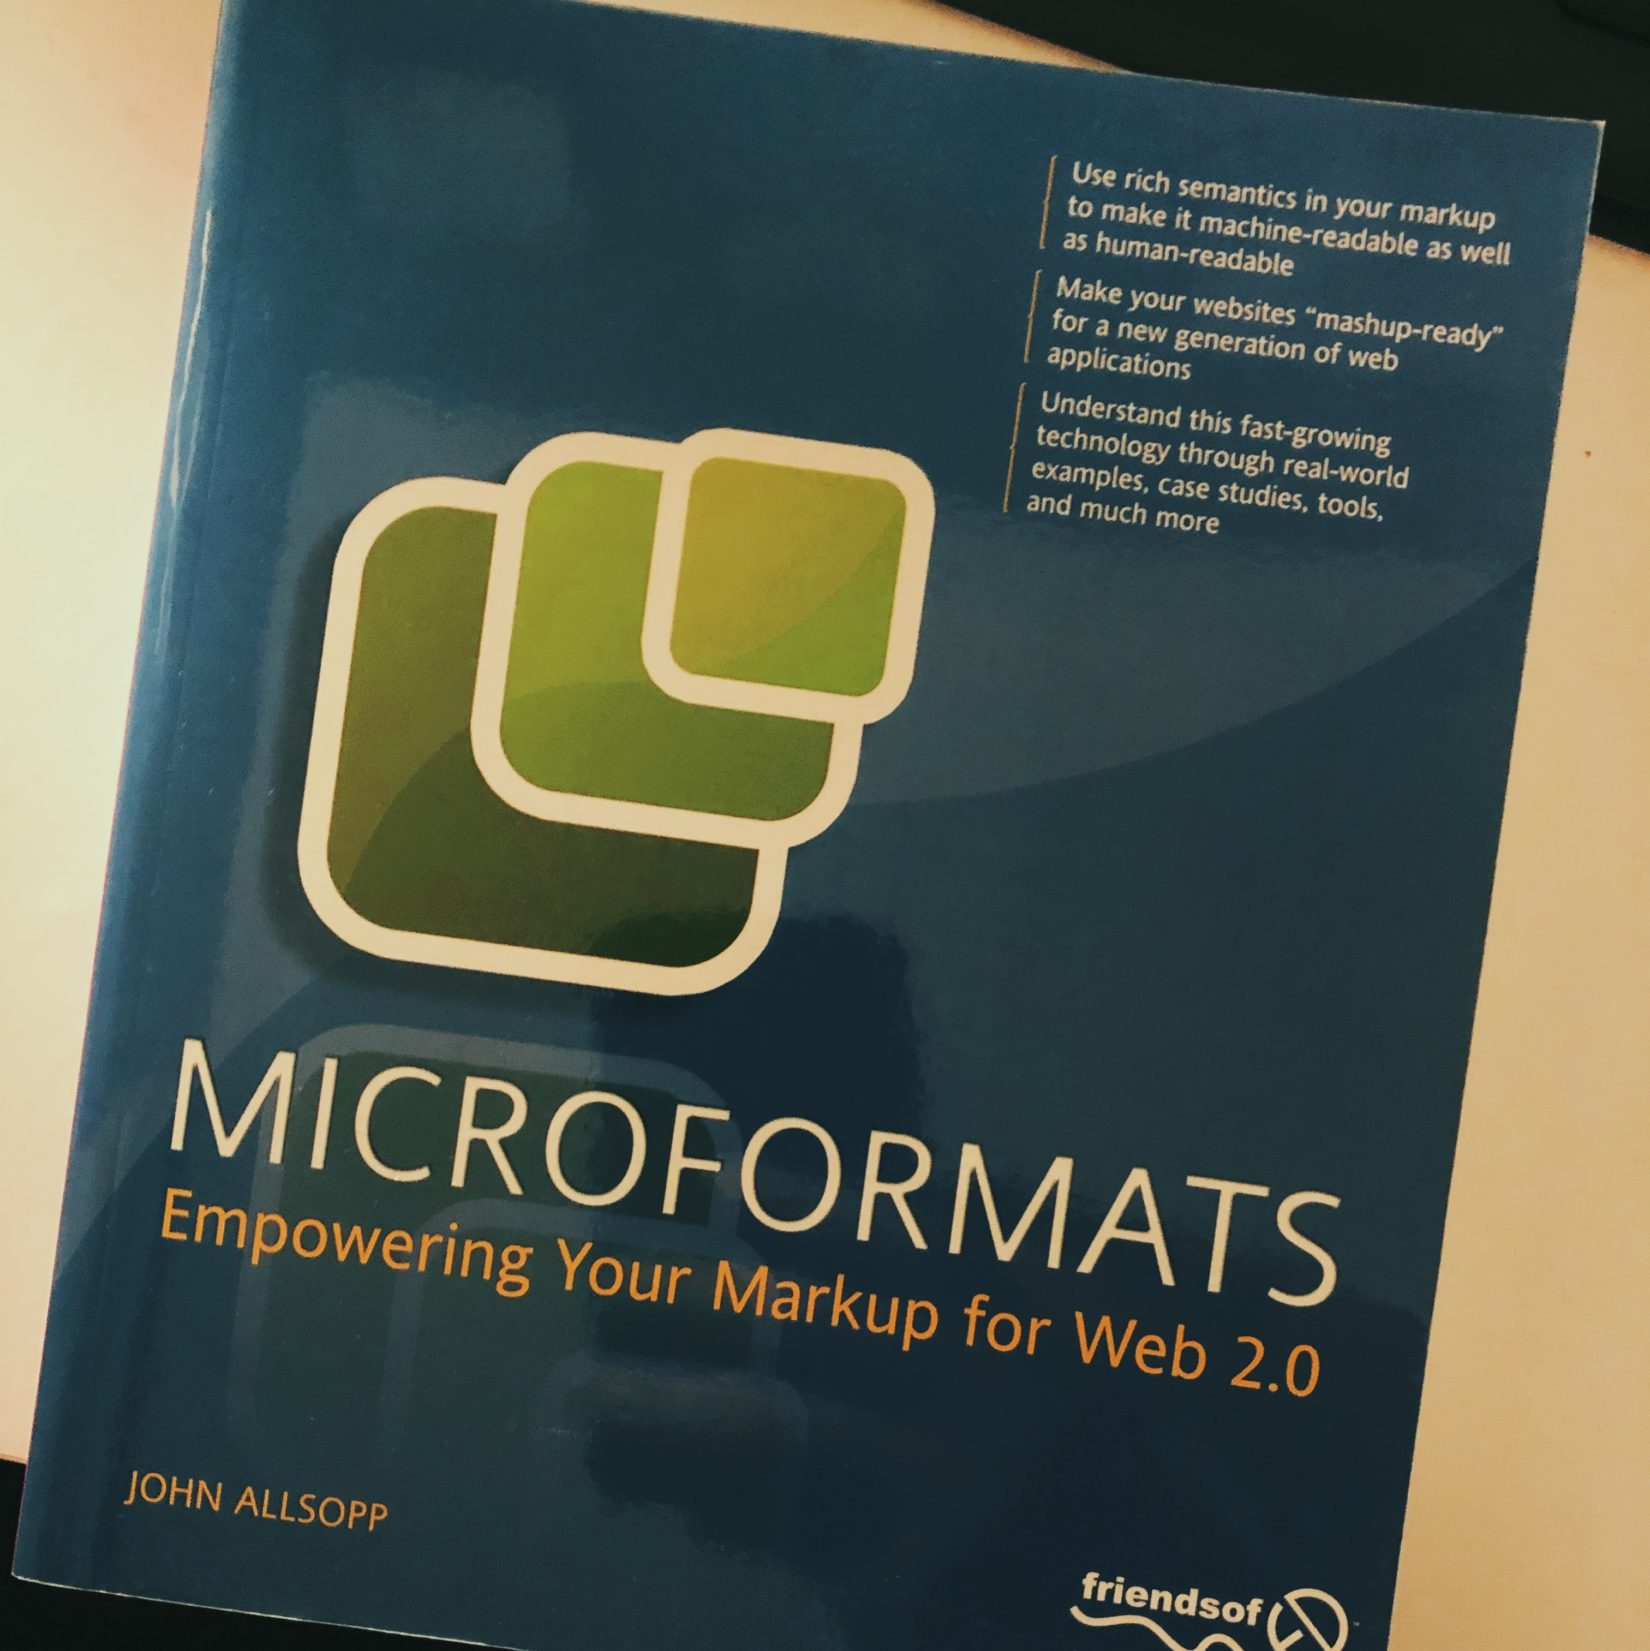 Front cover of “Microformats” by John Alsopp